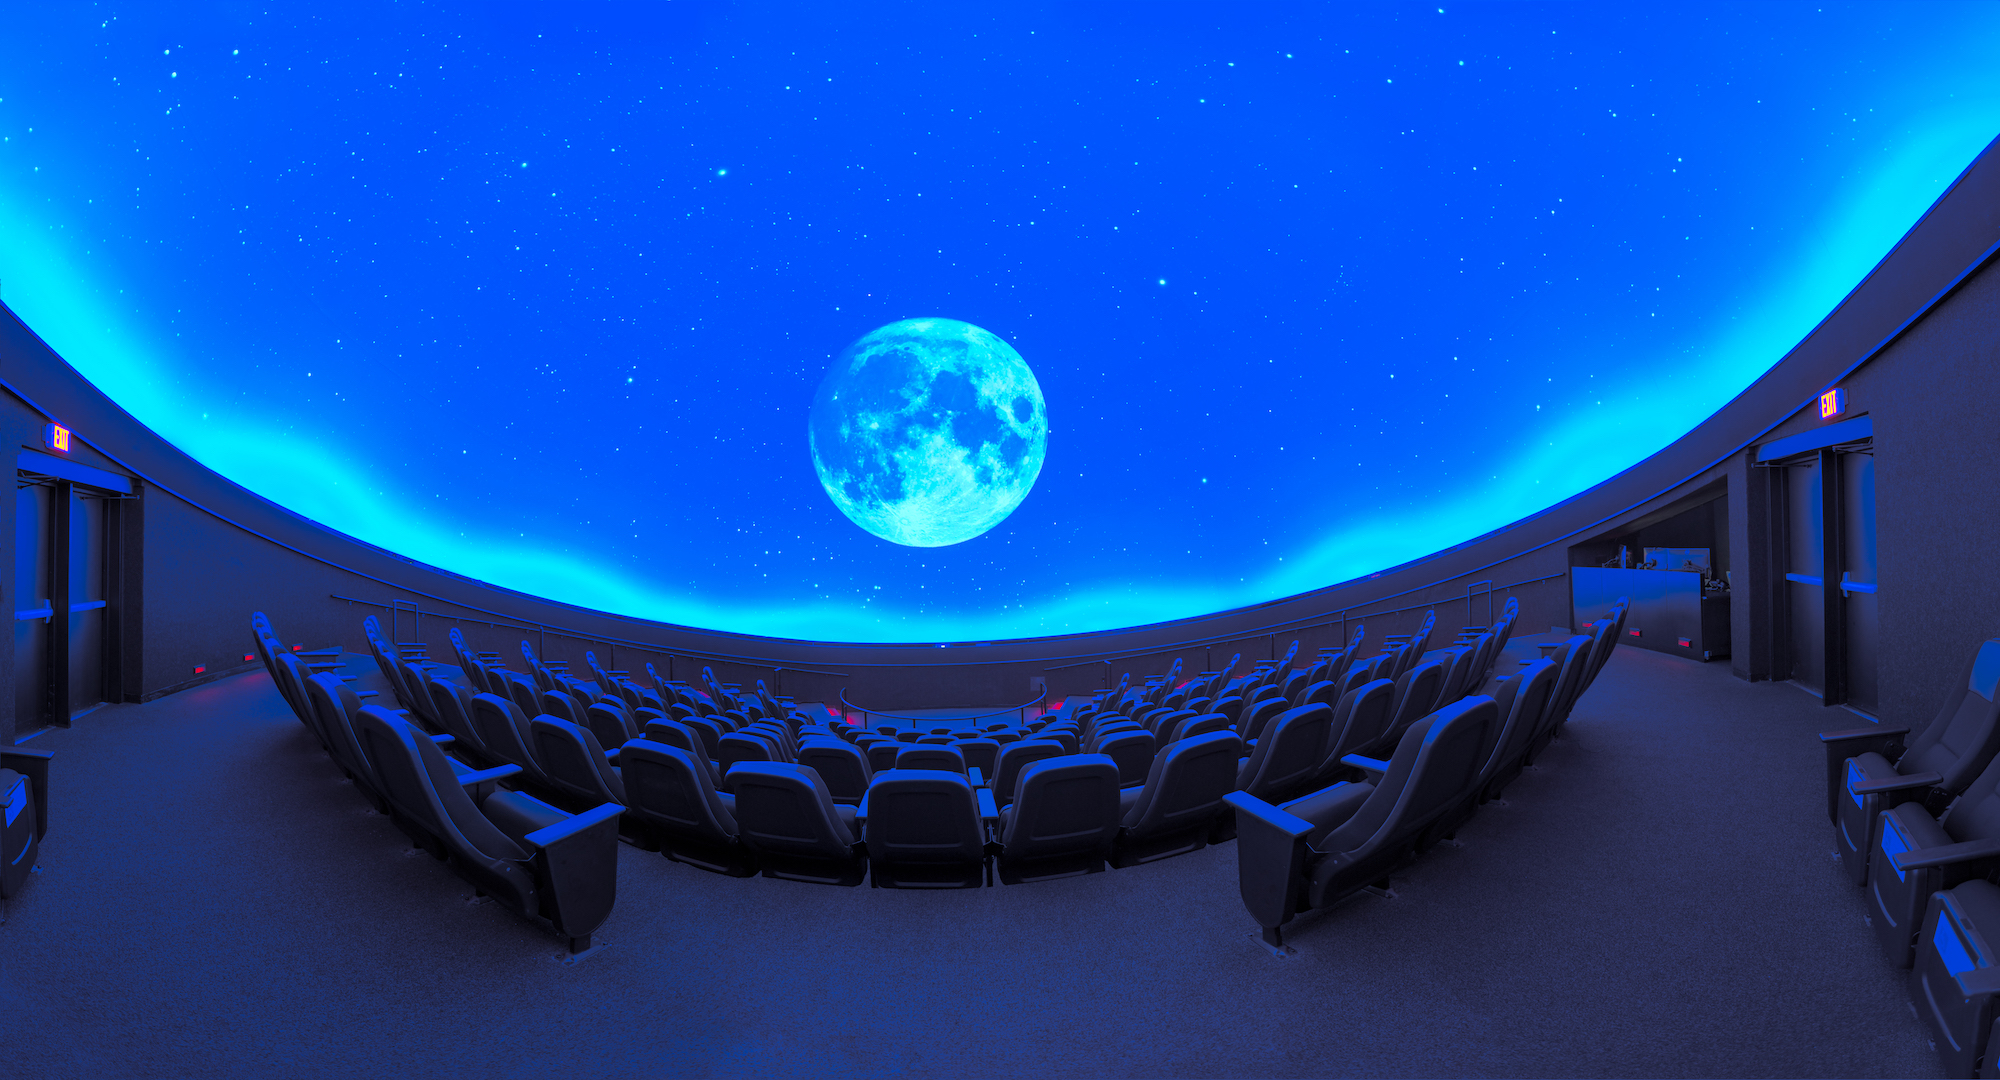 Fish eye shot of the Space Theater empty with blue screen and projection of the moon. Empty theater.